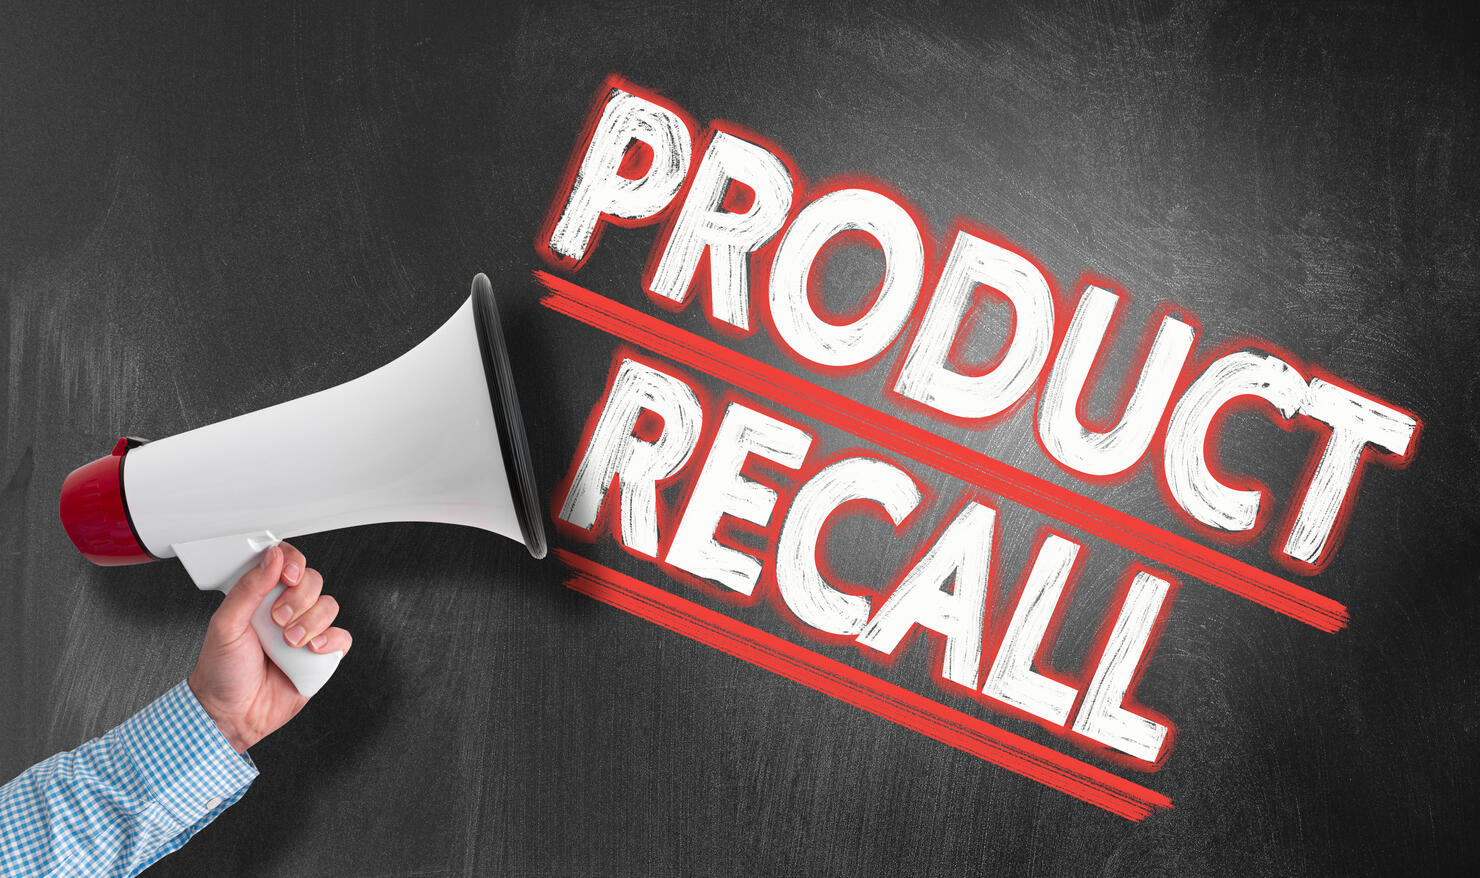 hand holding megaphone against blackboard with text PRODUCT RECALL